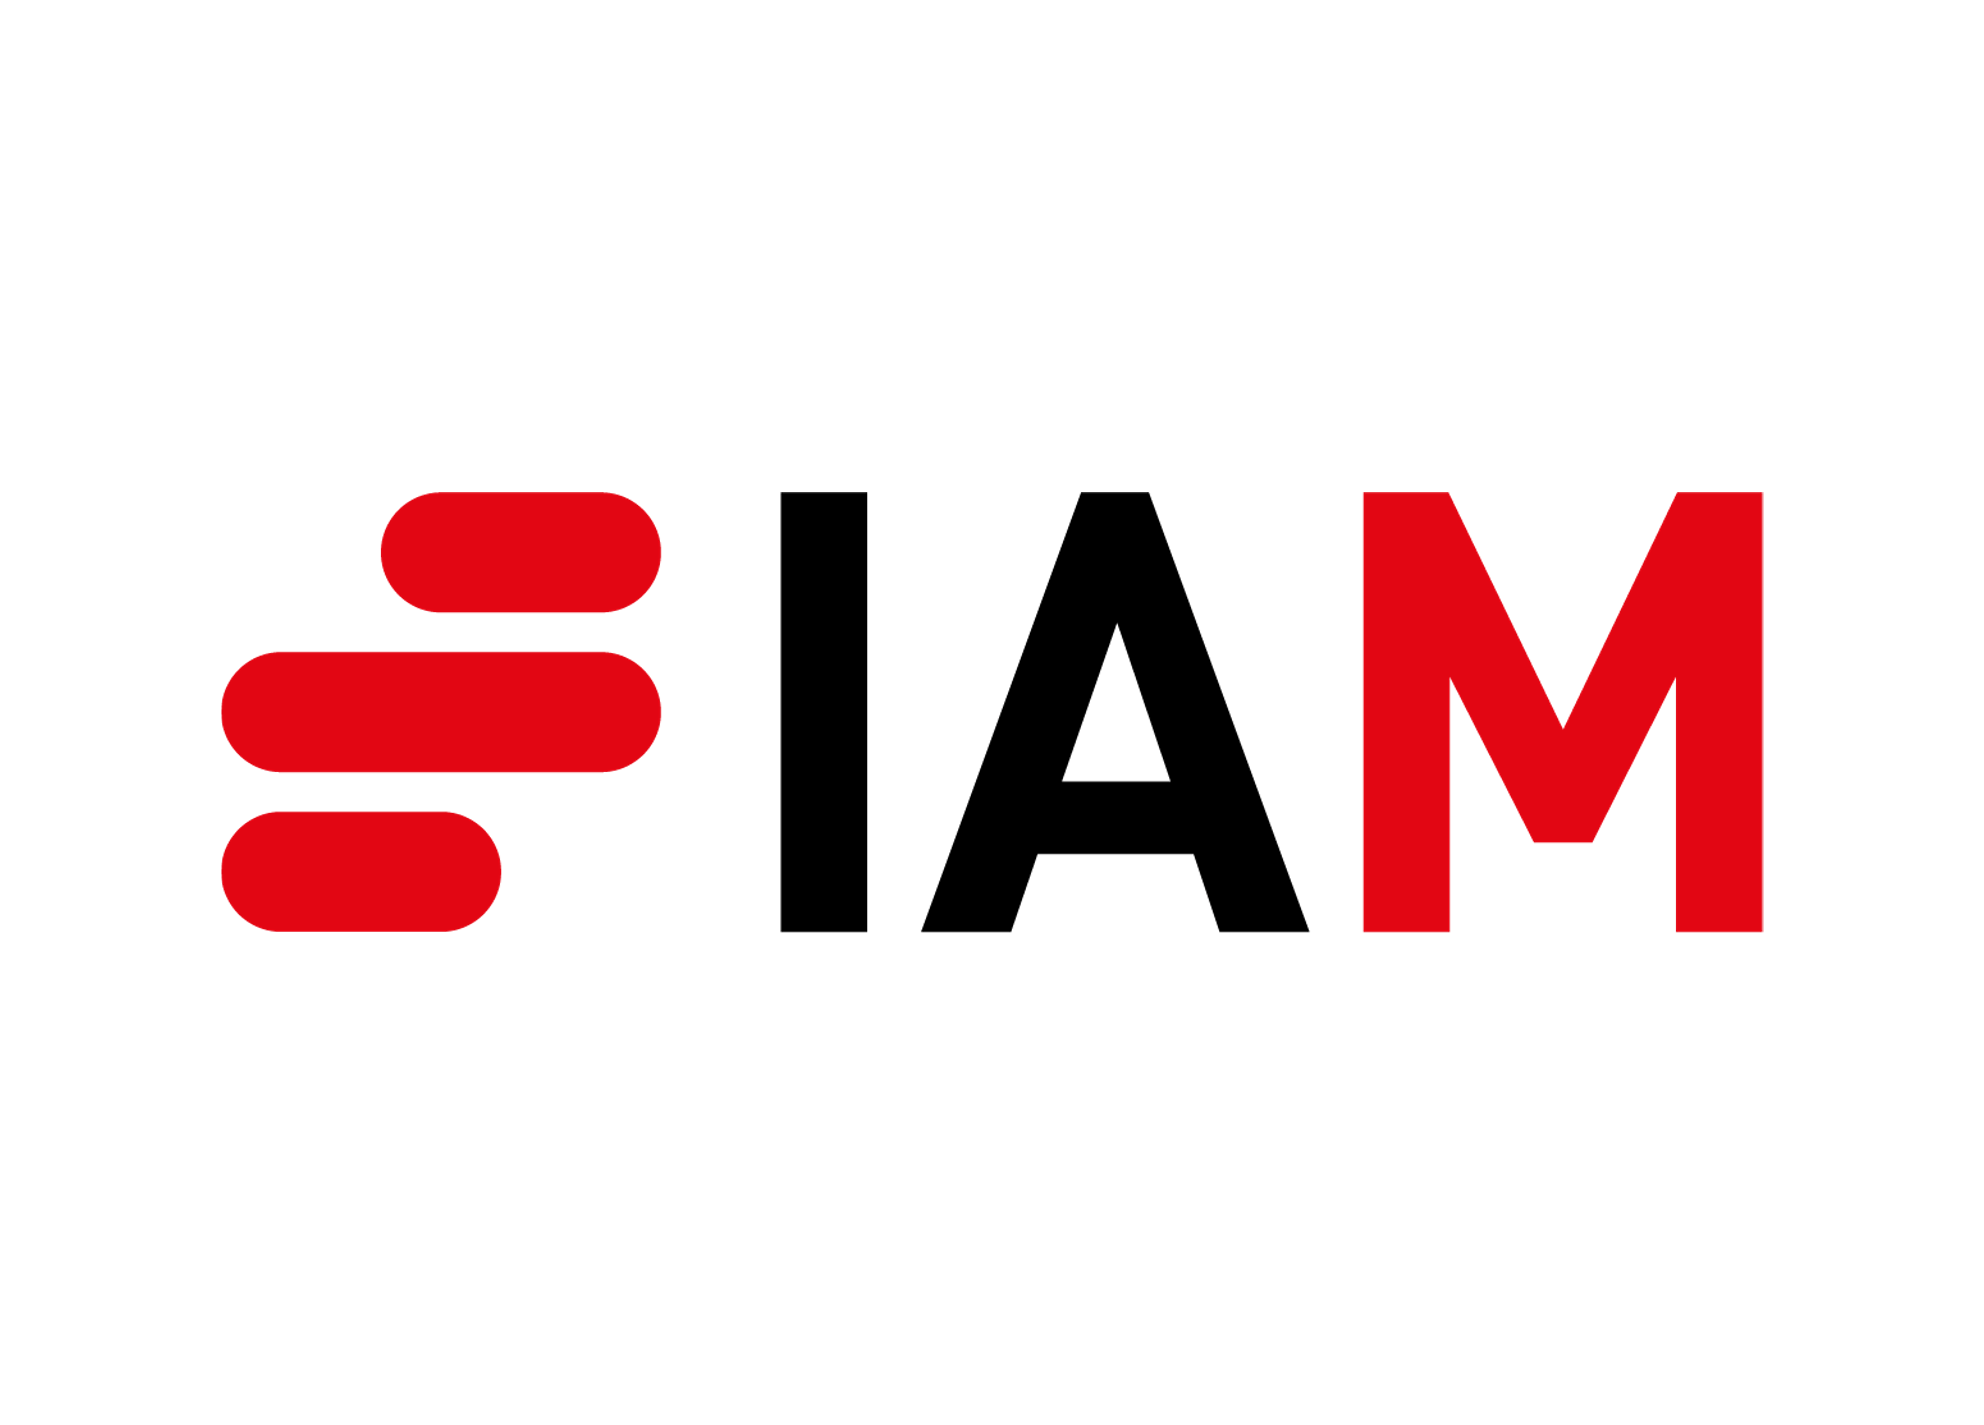 IAM: Top Patent Market Players and IAM’s Editorial Team Make Their Predictions for 2018